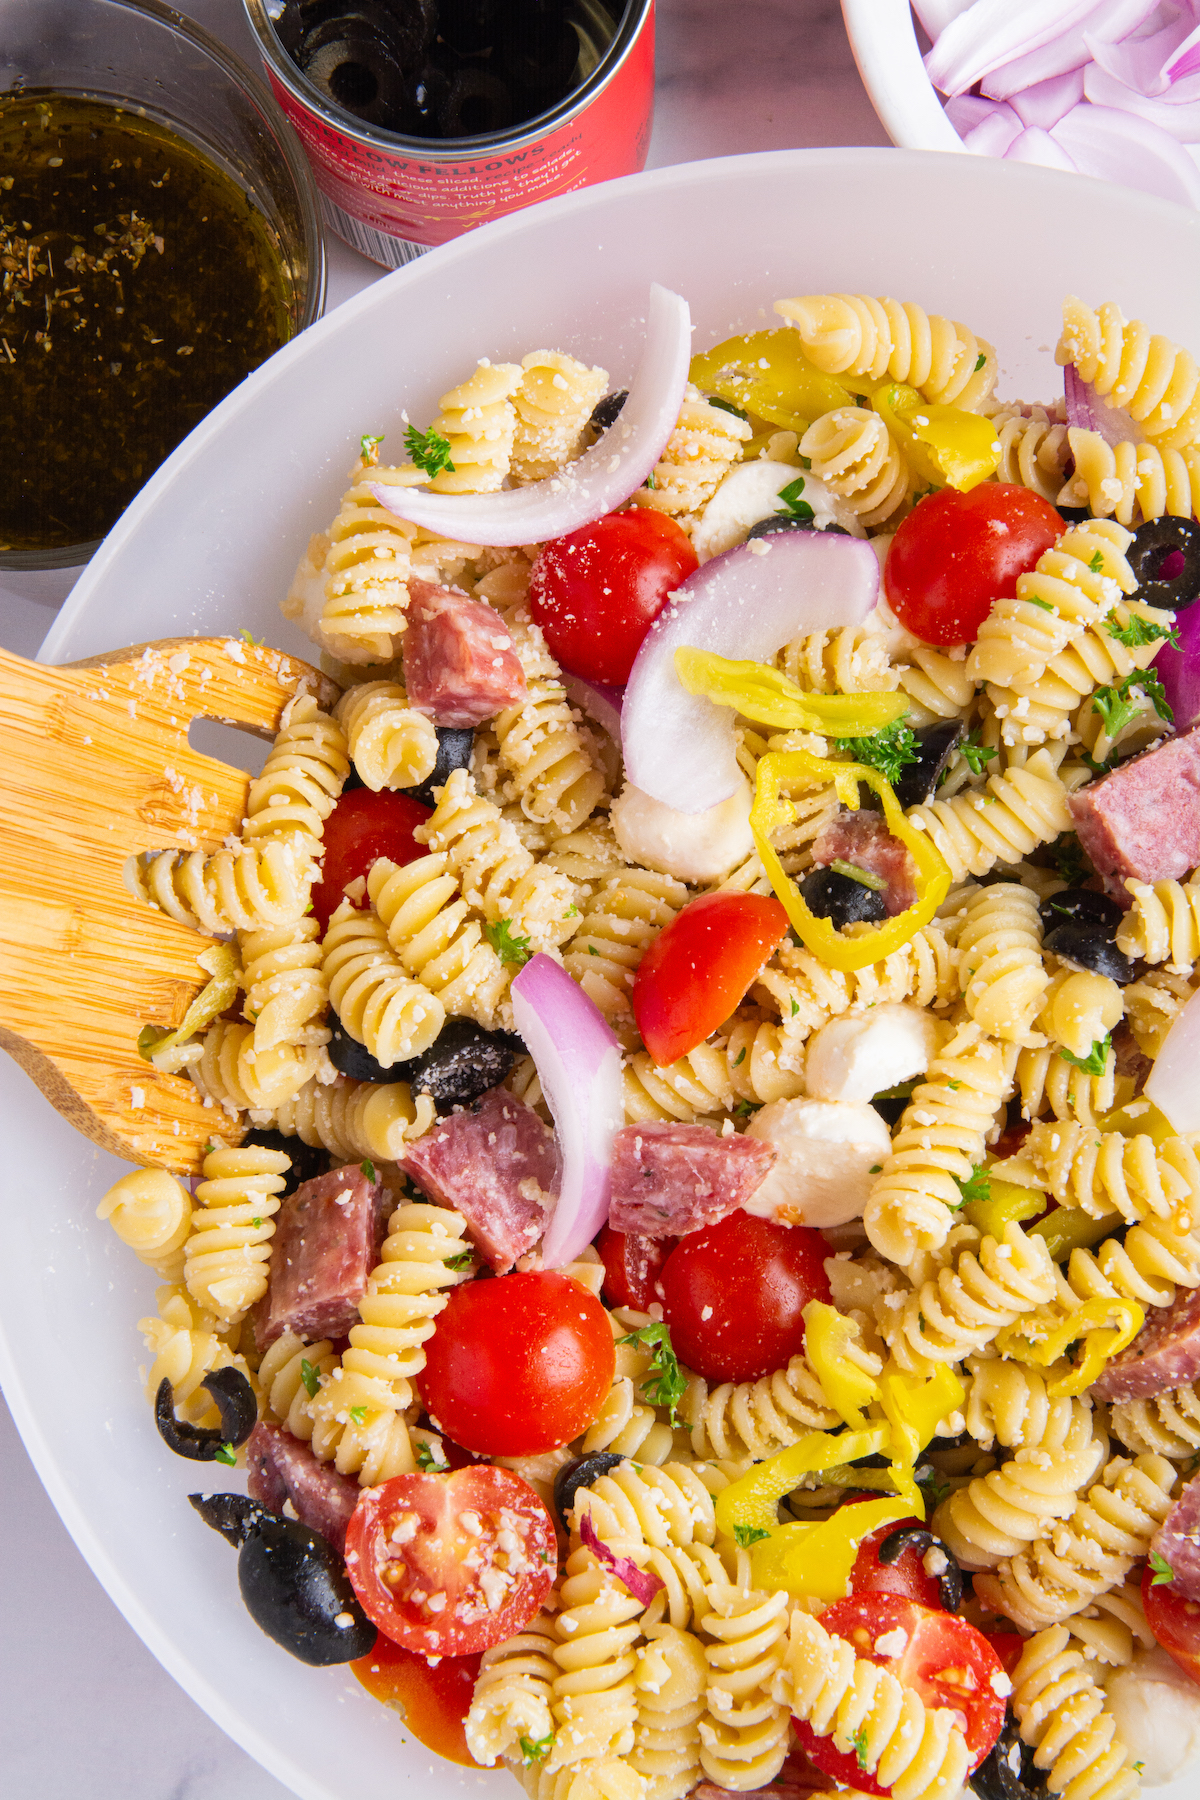 A bowl of Italian pasta salad without dressing. Cooked rotini pasta, sliced cherry tomatoes, chopped parsley, sliced red onion, sliced pepperoncini, sliced black olives, chopped dry salami, mozzarella balls, grated Parmesan cheese.